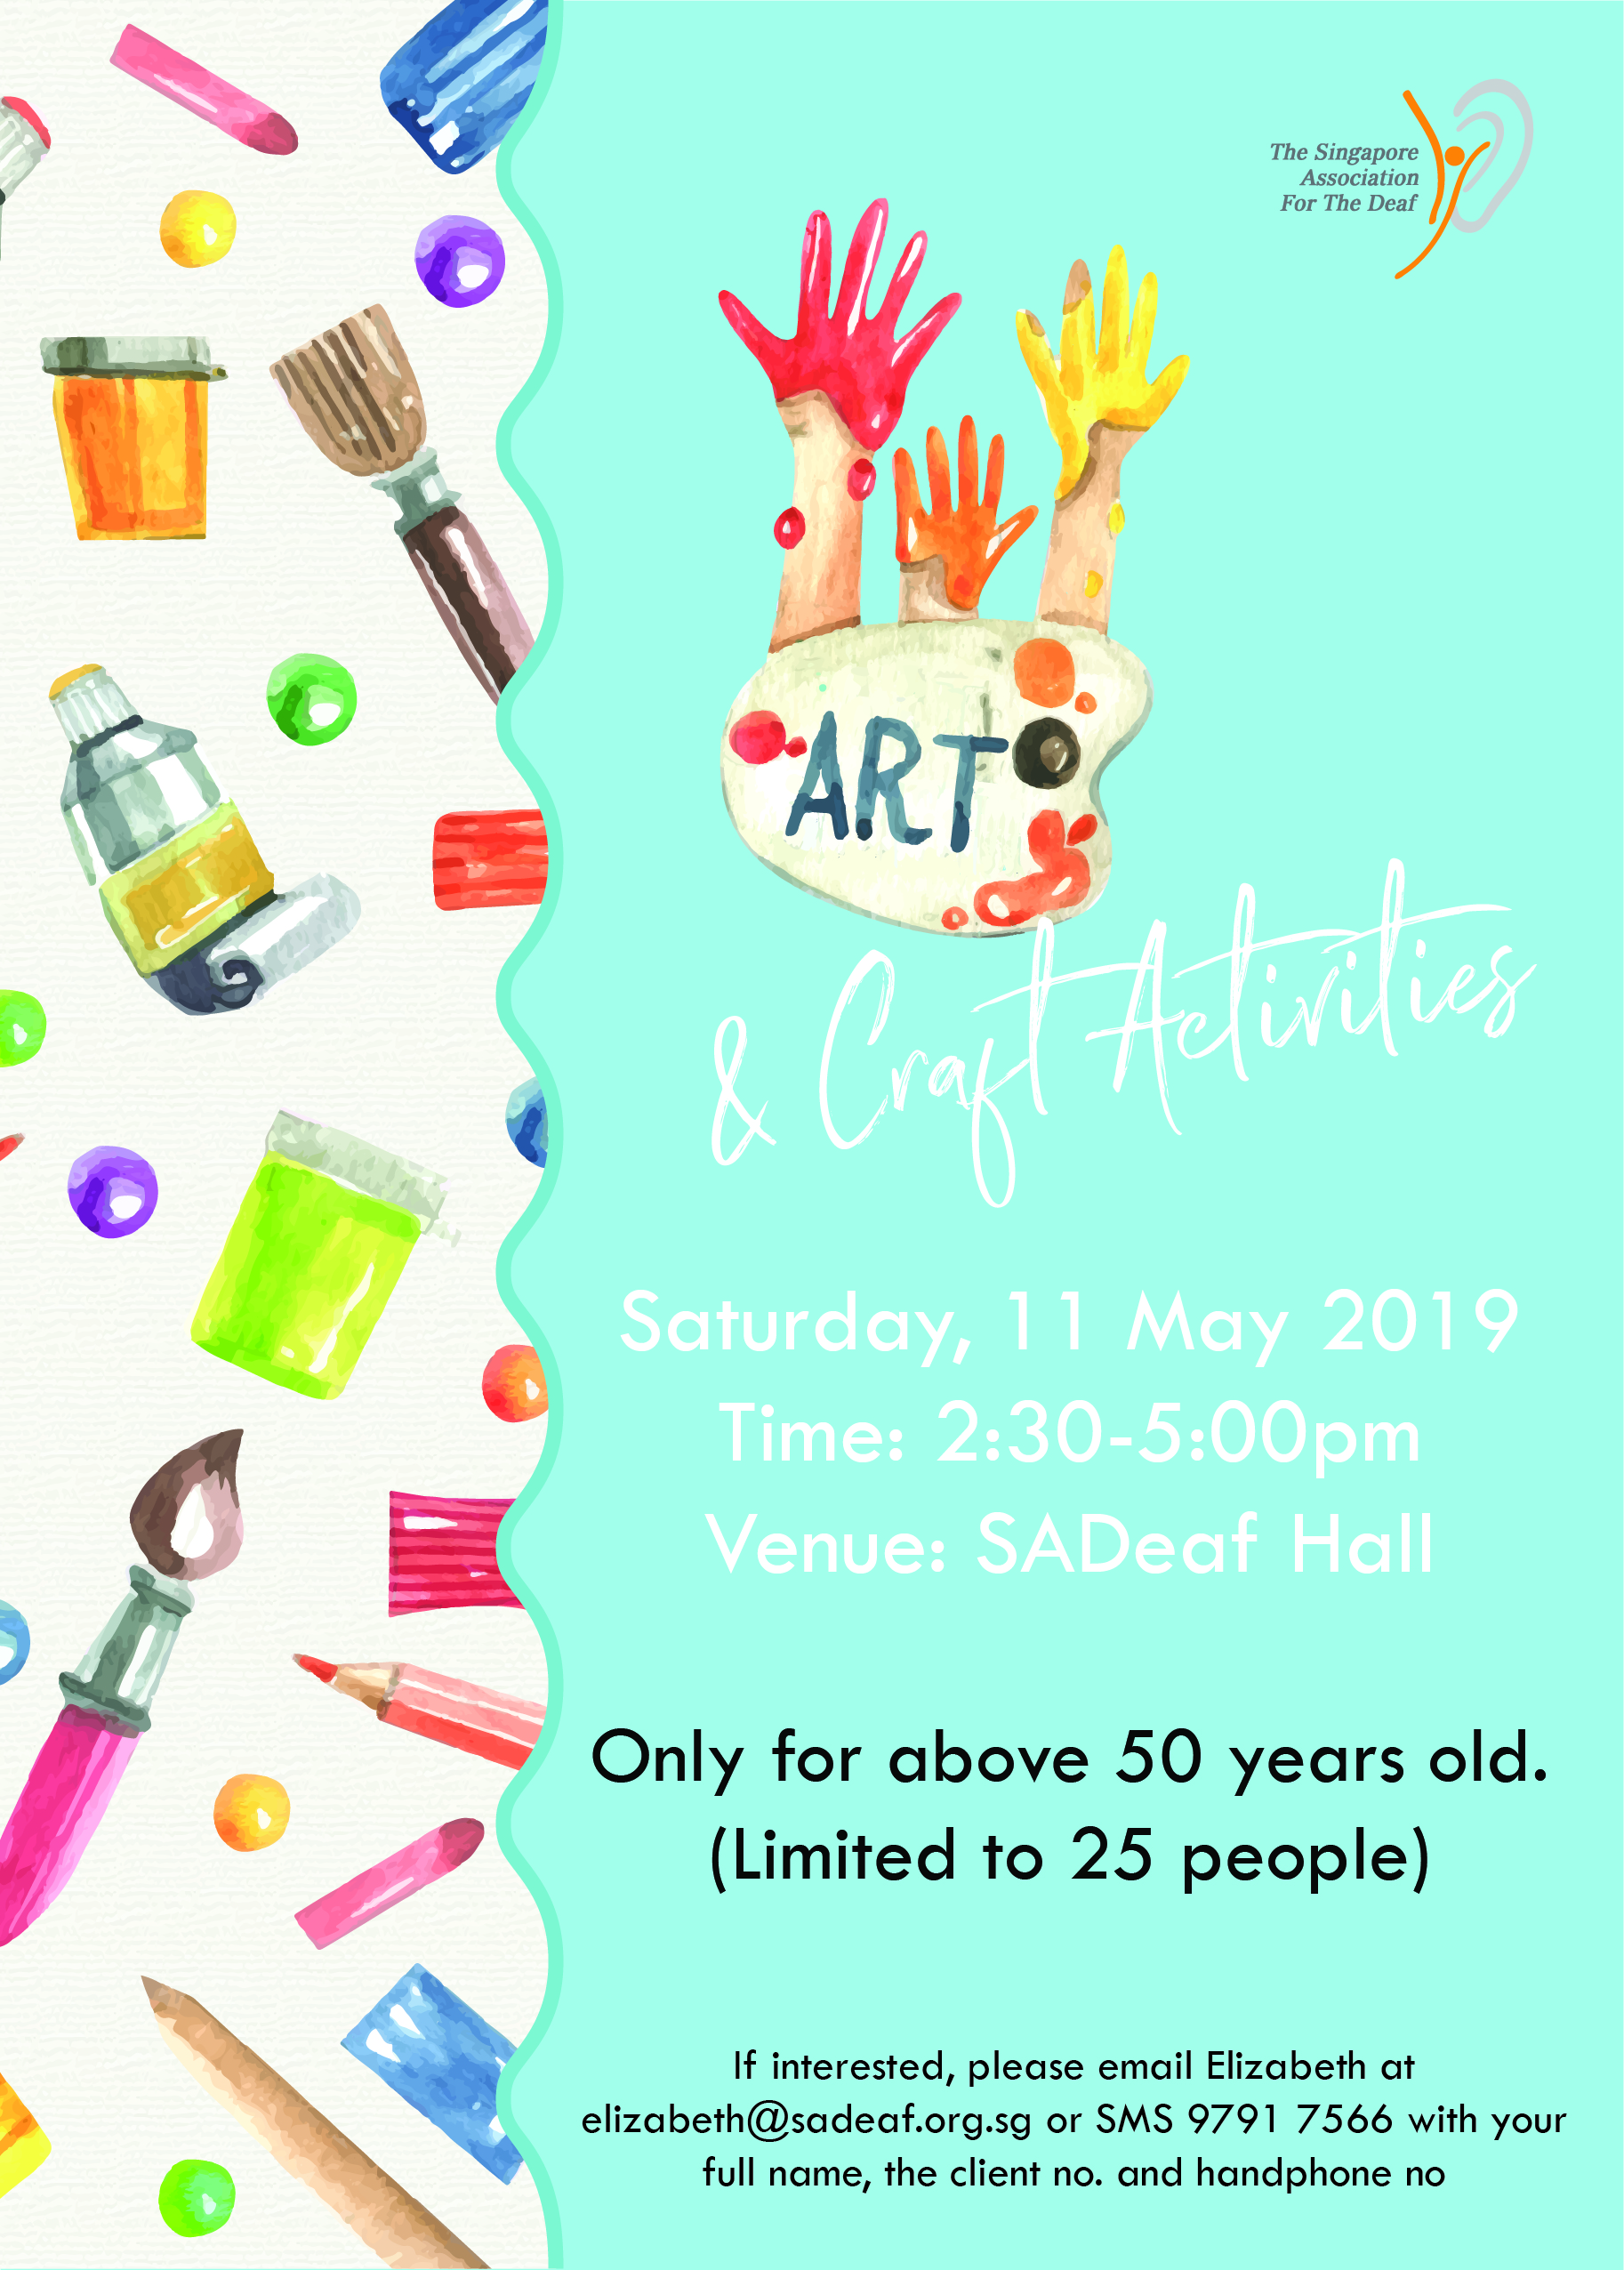 Art & Craft Activities – The Singapore Association for the Deaf